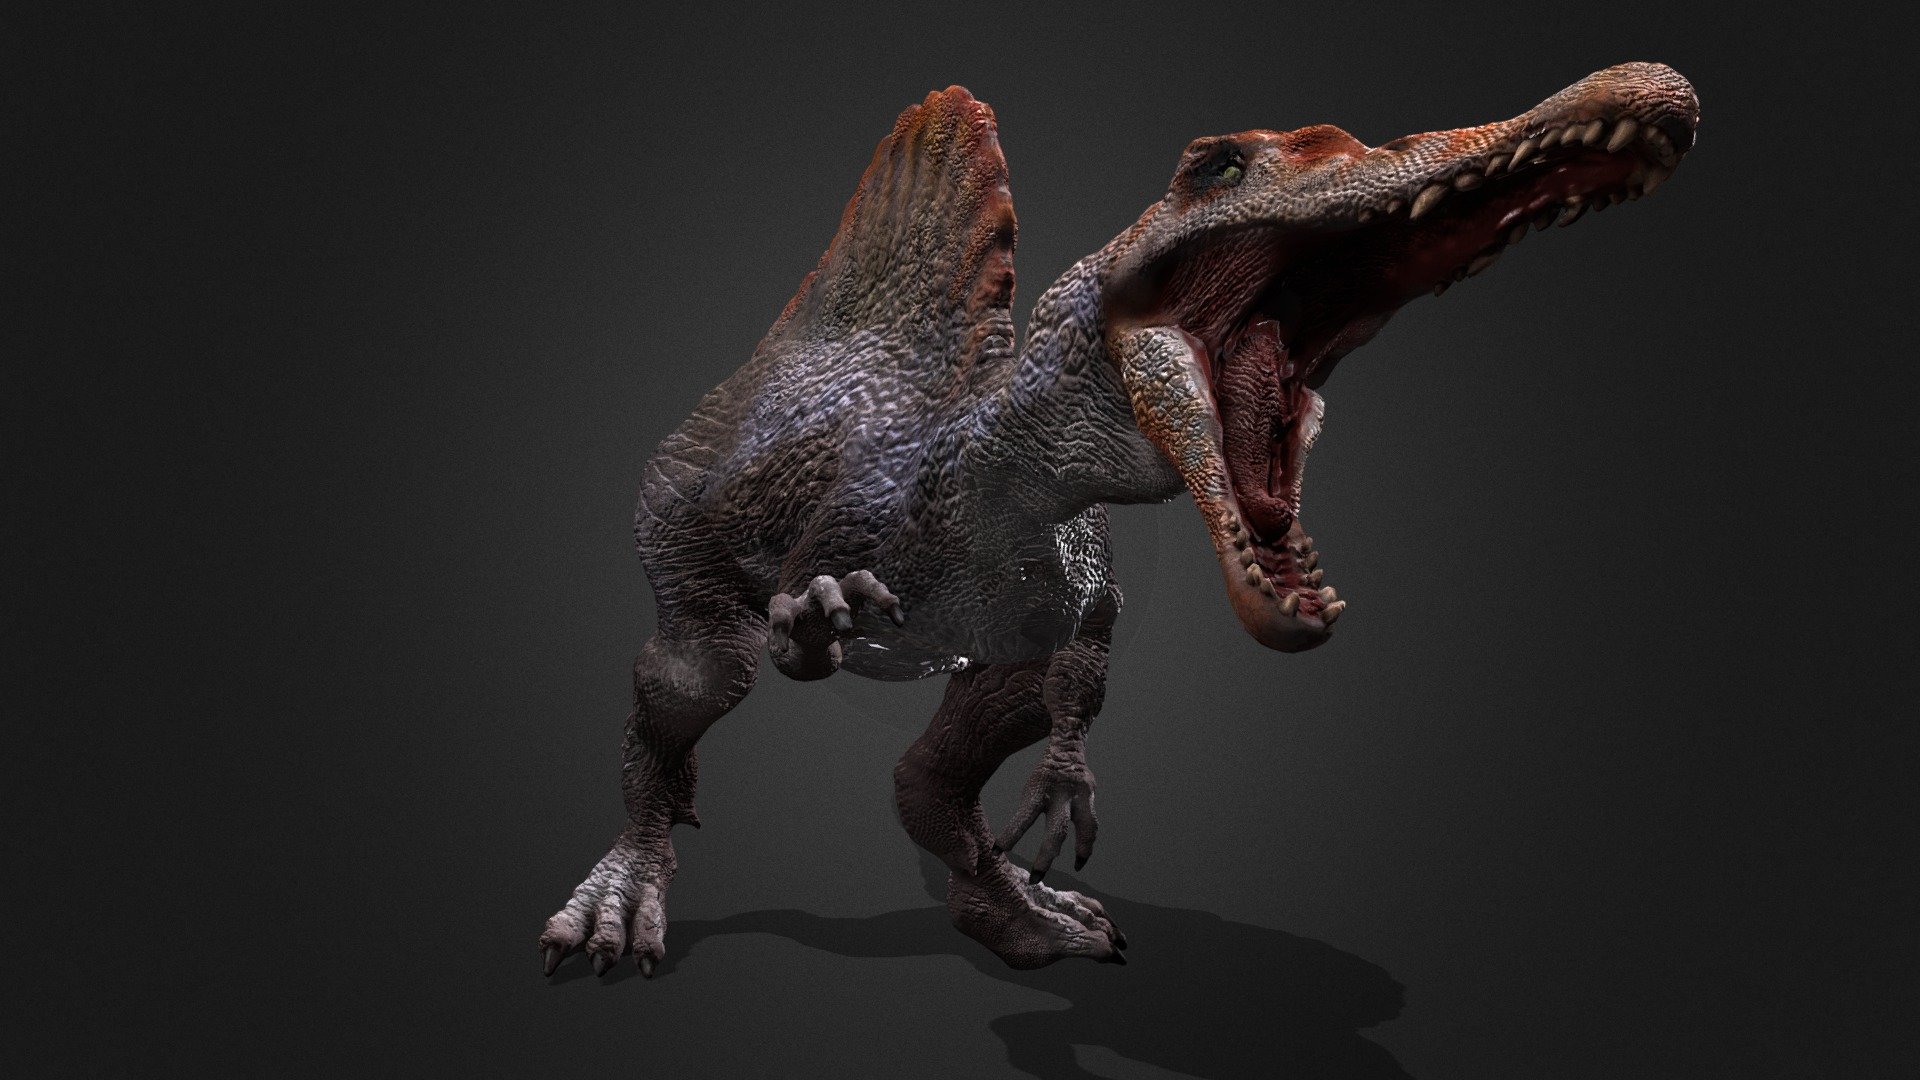 spinosaurus-animation-download-free-3d-model-by-seirogan-c11709d